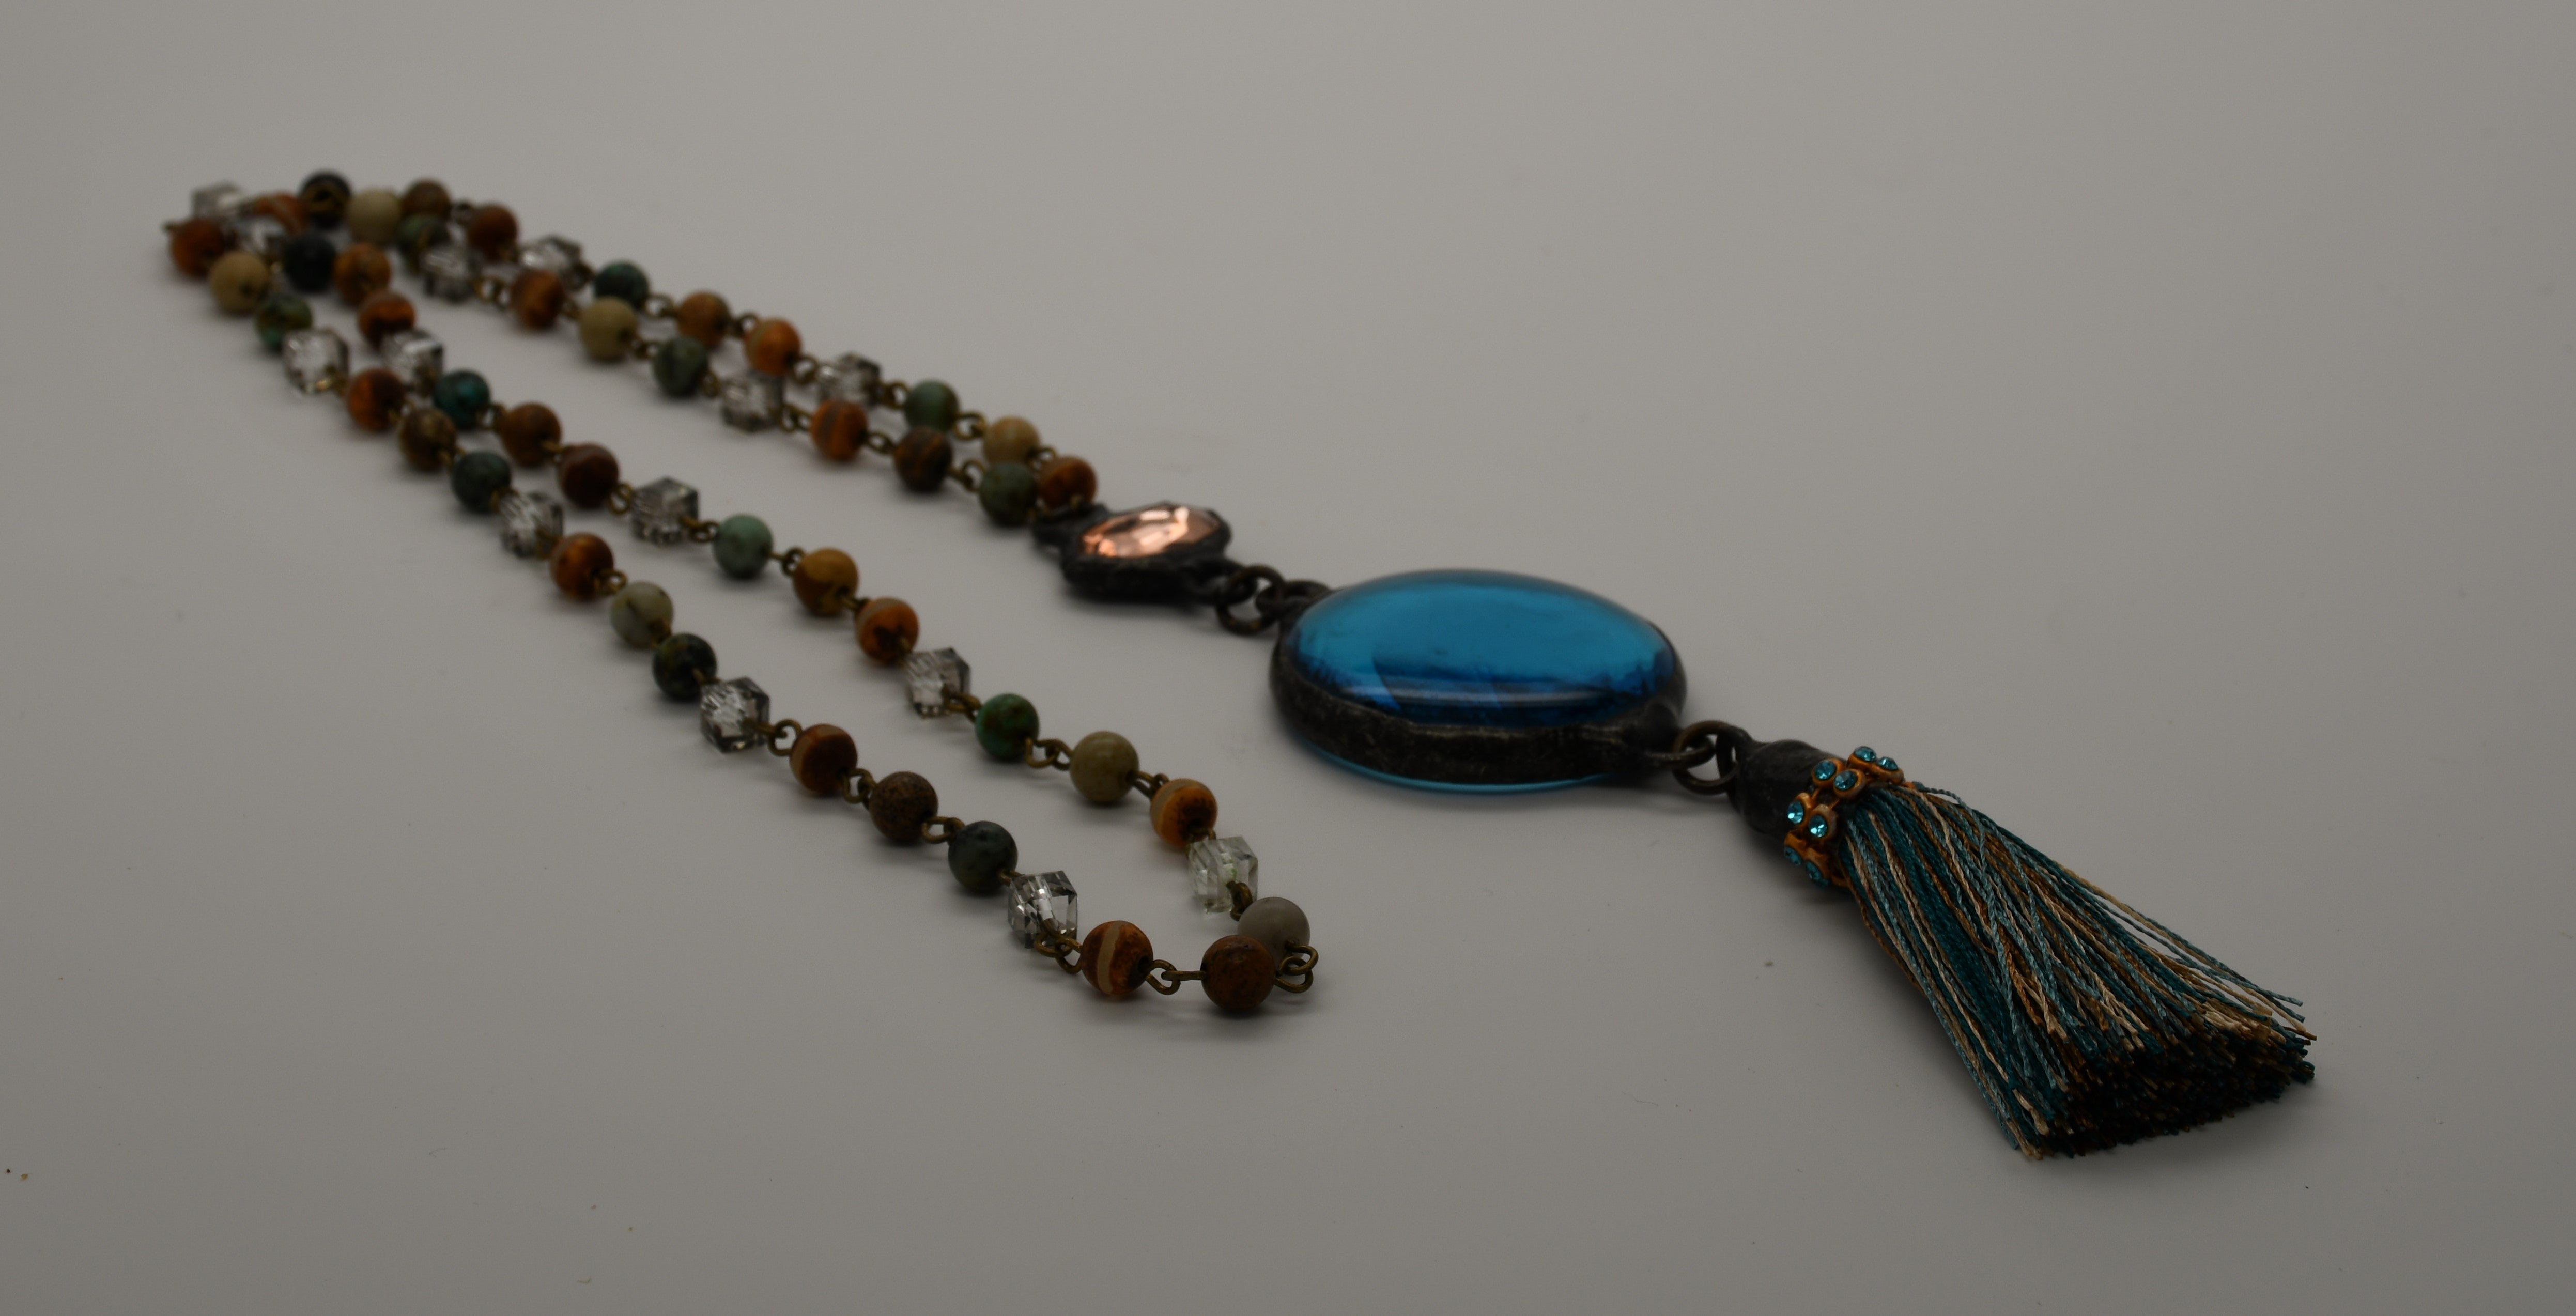 Blue and Brown tassel necklace (one of a kind)